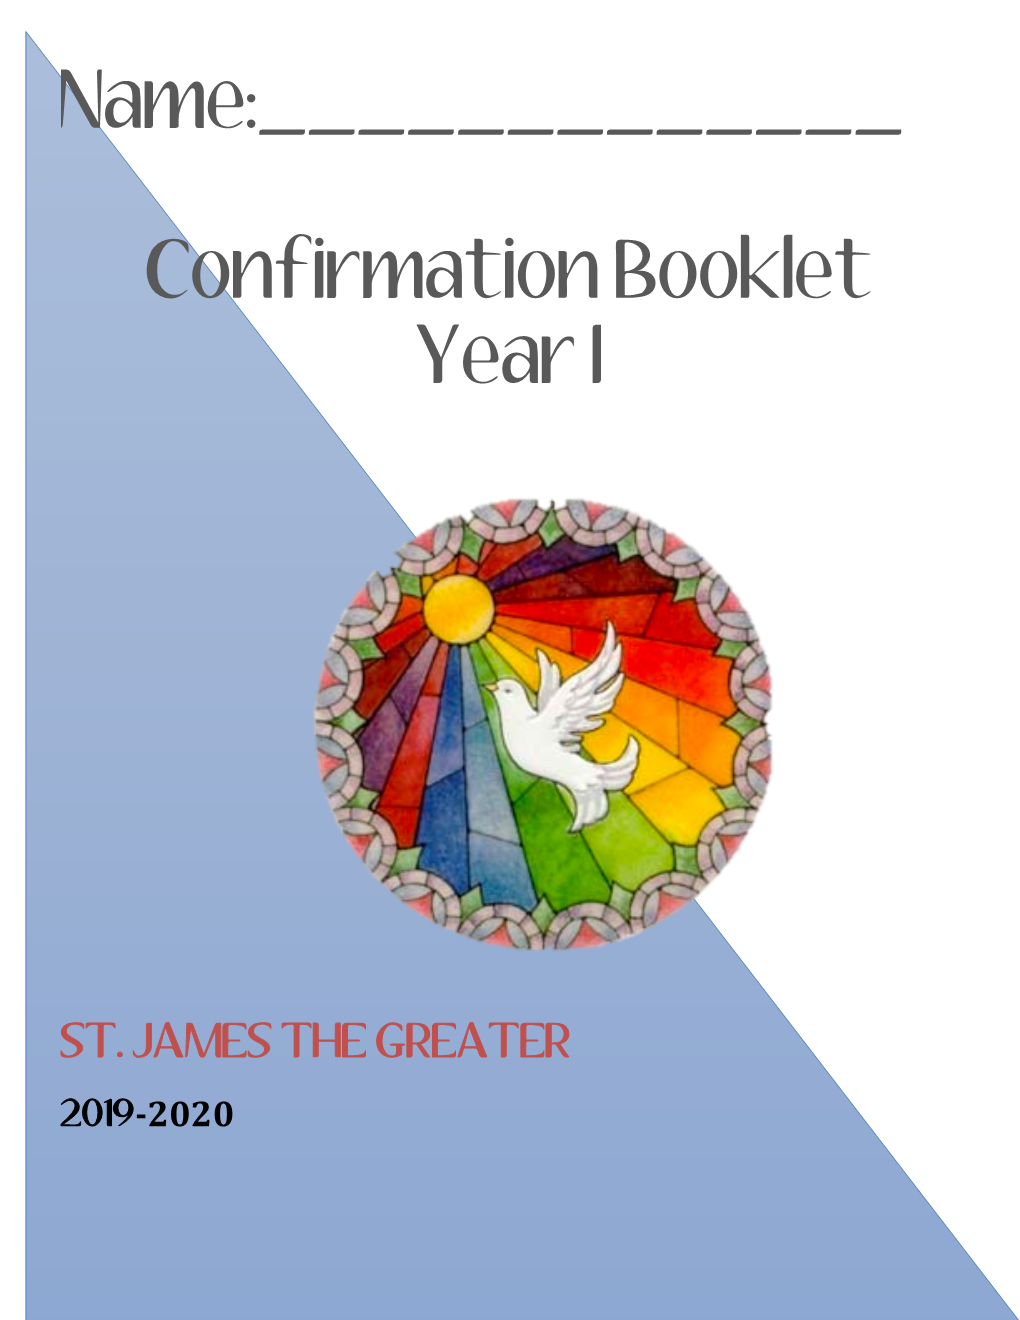 Name:___Confirmation Booklet Year I